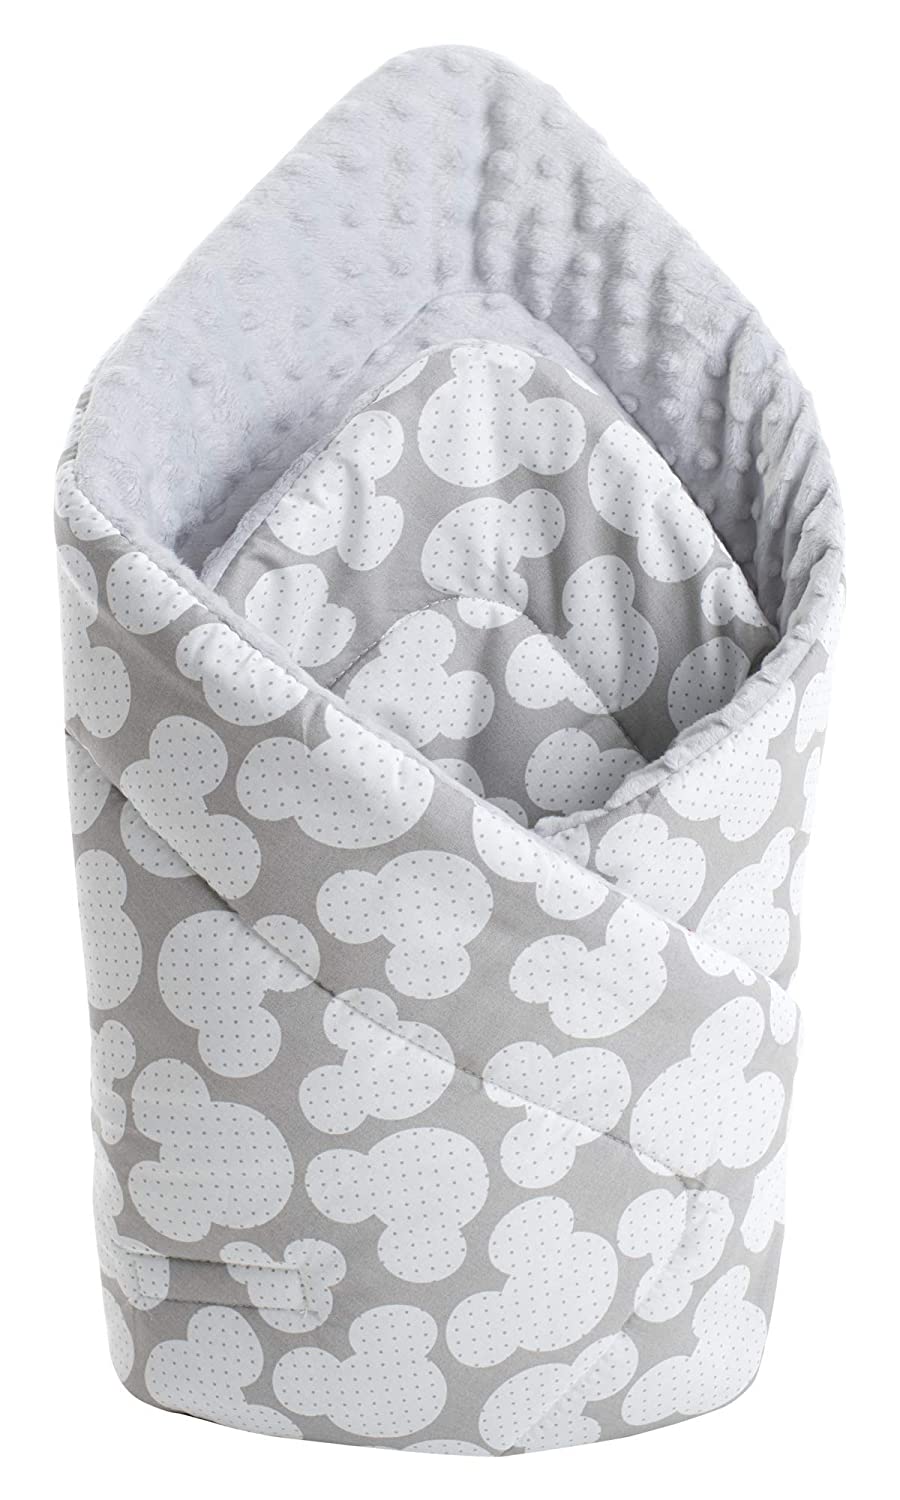 Medi Partners Swaddling Blanket Pillow Minky 100% Cotton 75 x 75 cm Sleeping Bag Double-Sided Soft All Year Round Multifunctional Anti-Allergic Babies (Miki with Grey